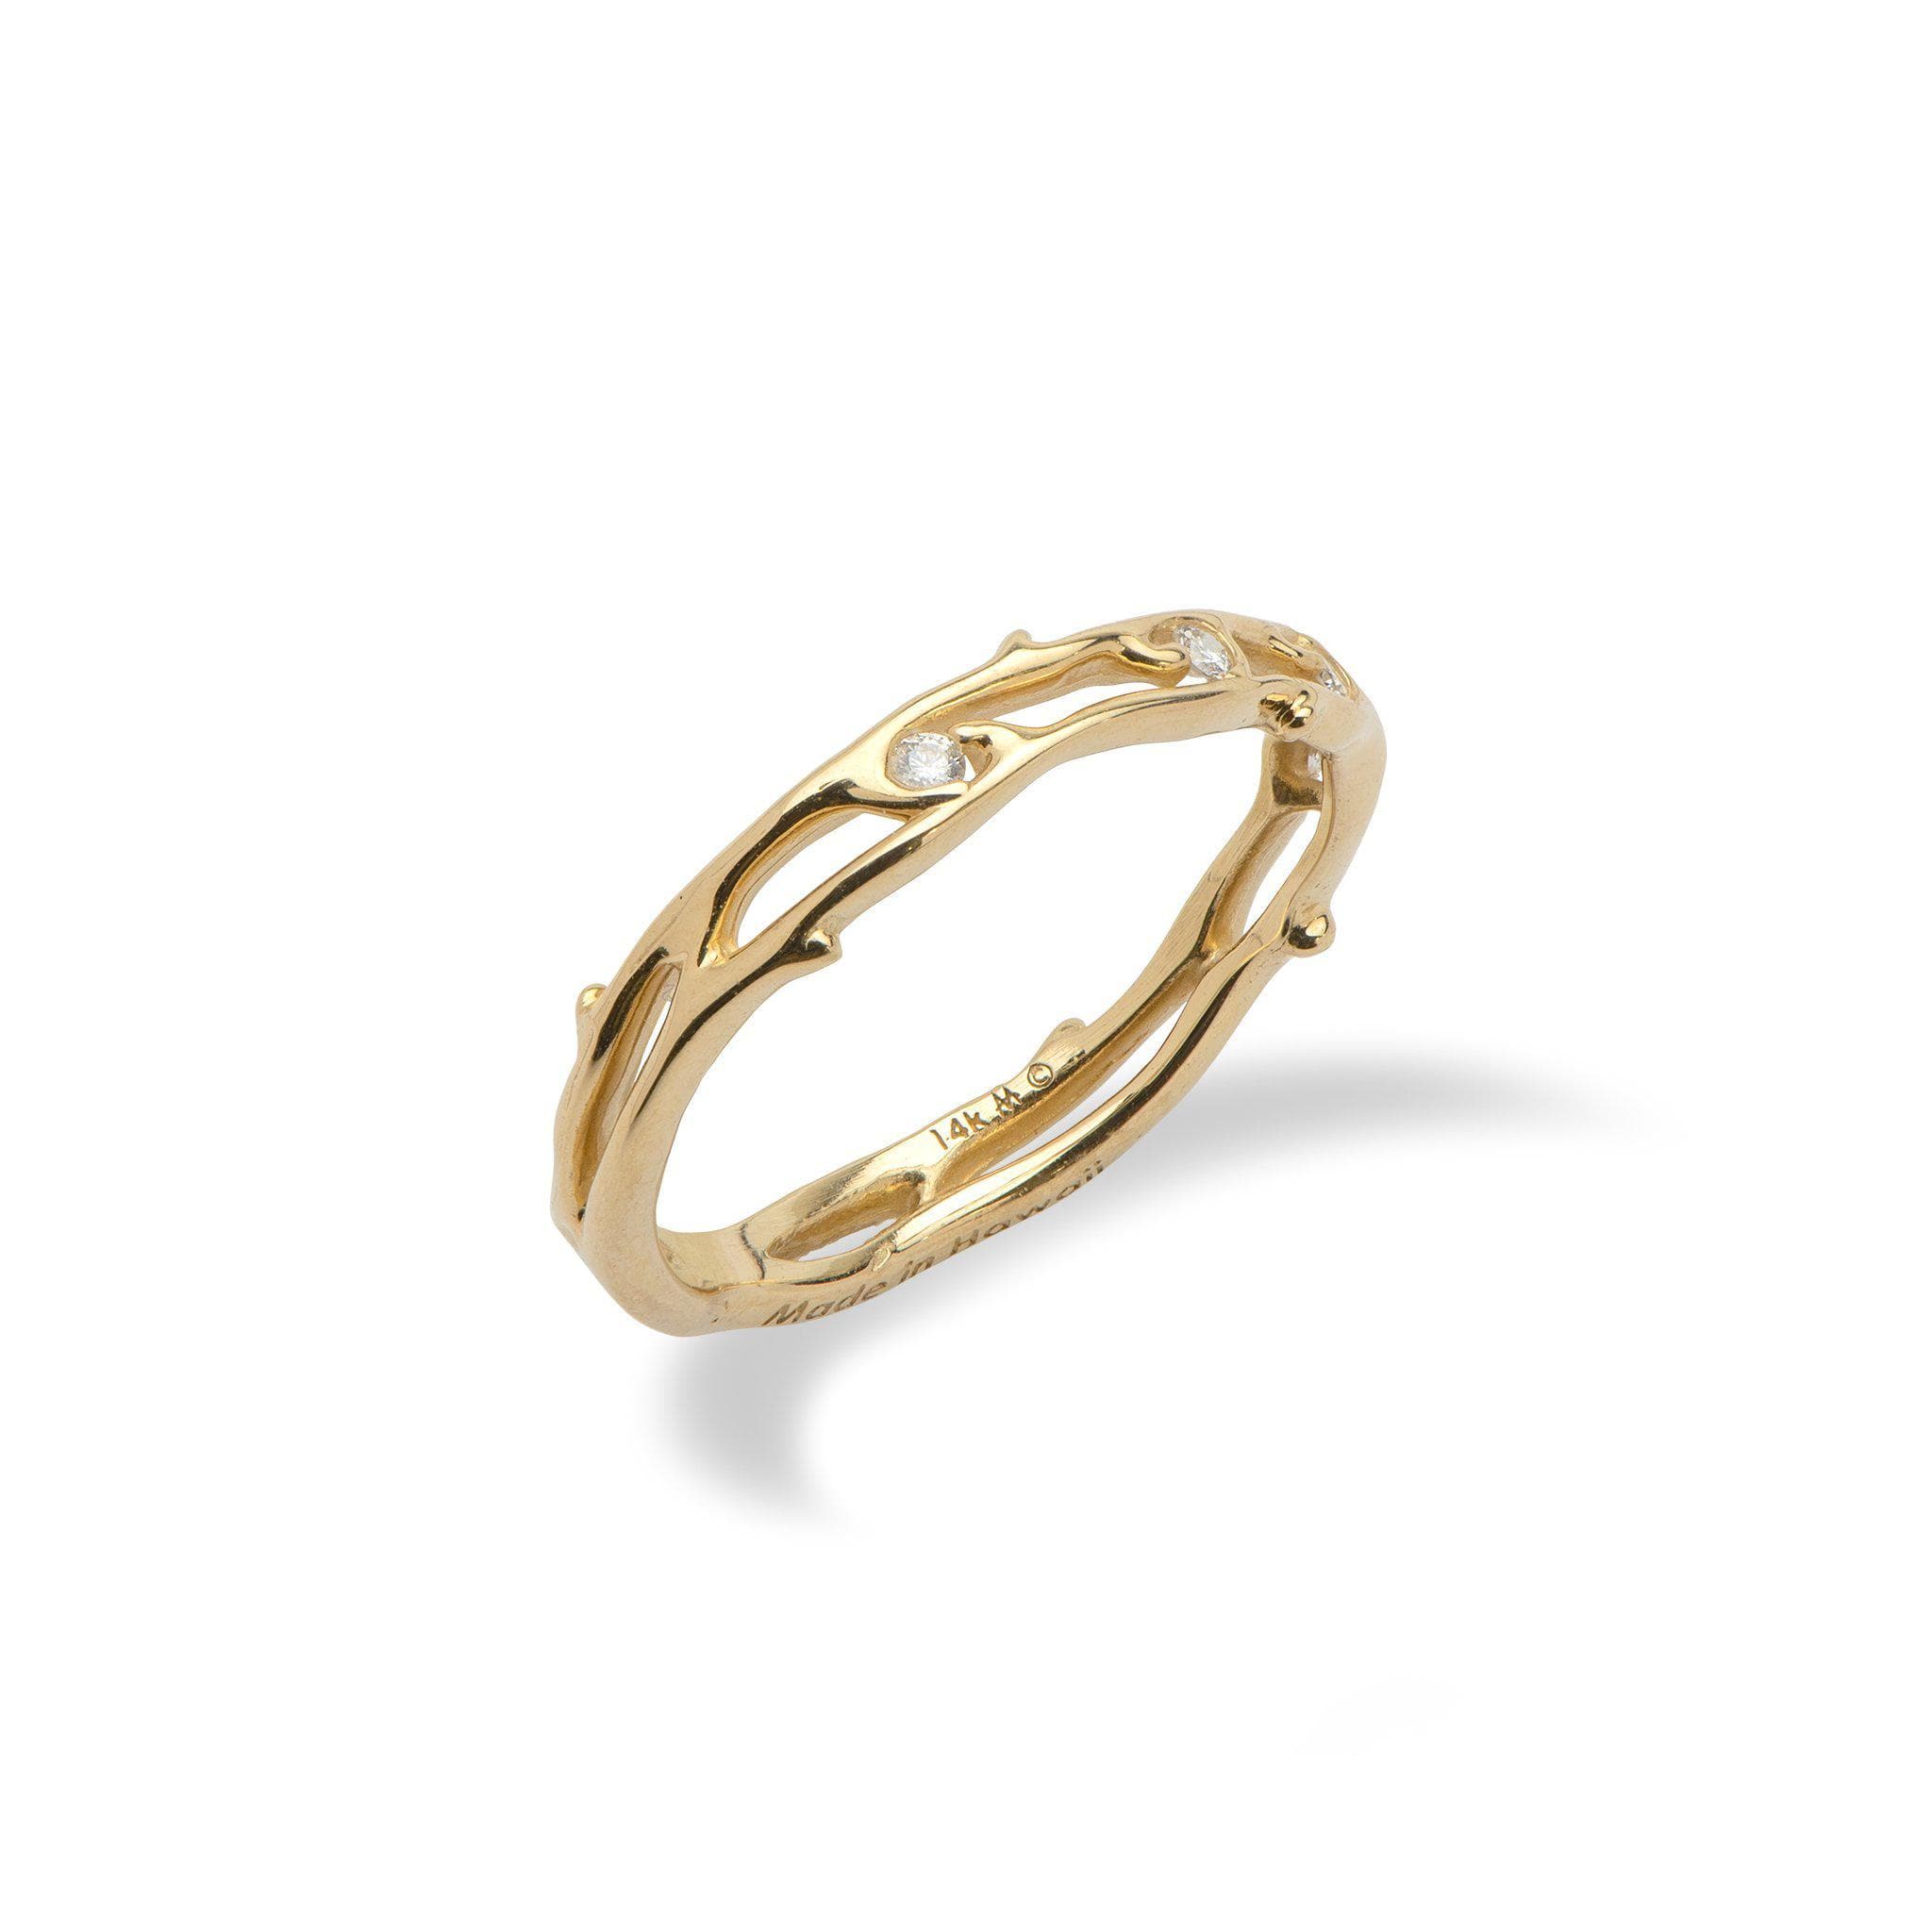 Hawaiian Heritage Ring in Gold with Diamonds-Maui Divers Jewelry